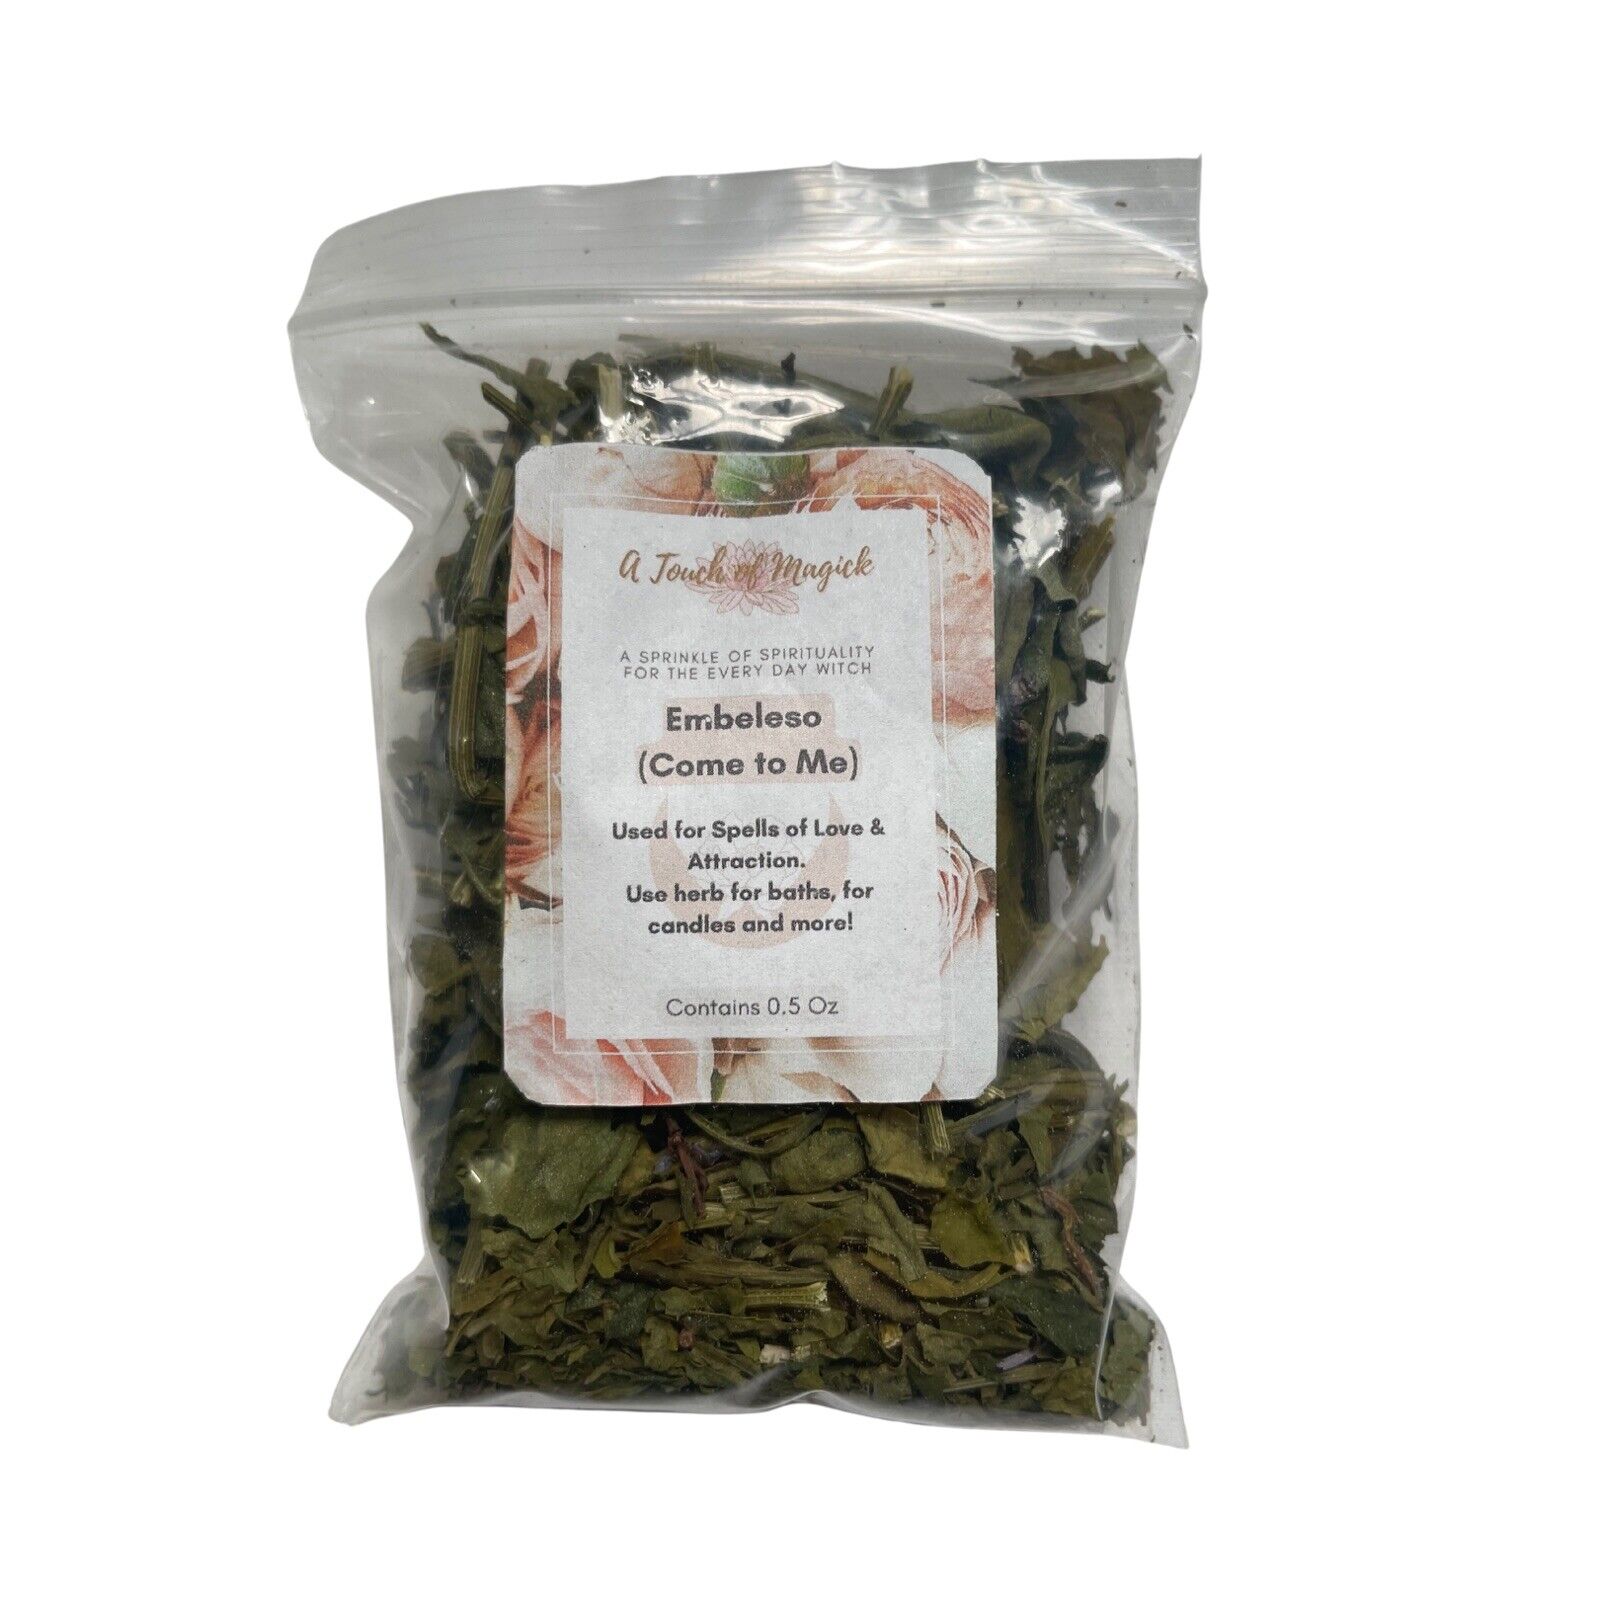 Embeleso / Ven a Mi (Come to Me) Dried Herb 0.5 OZ for Attraction and Love Work 